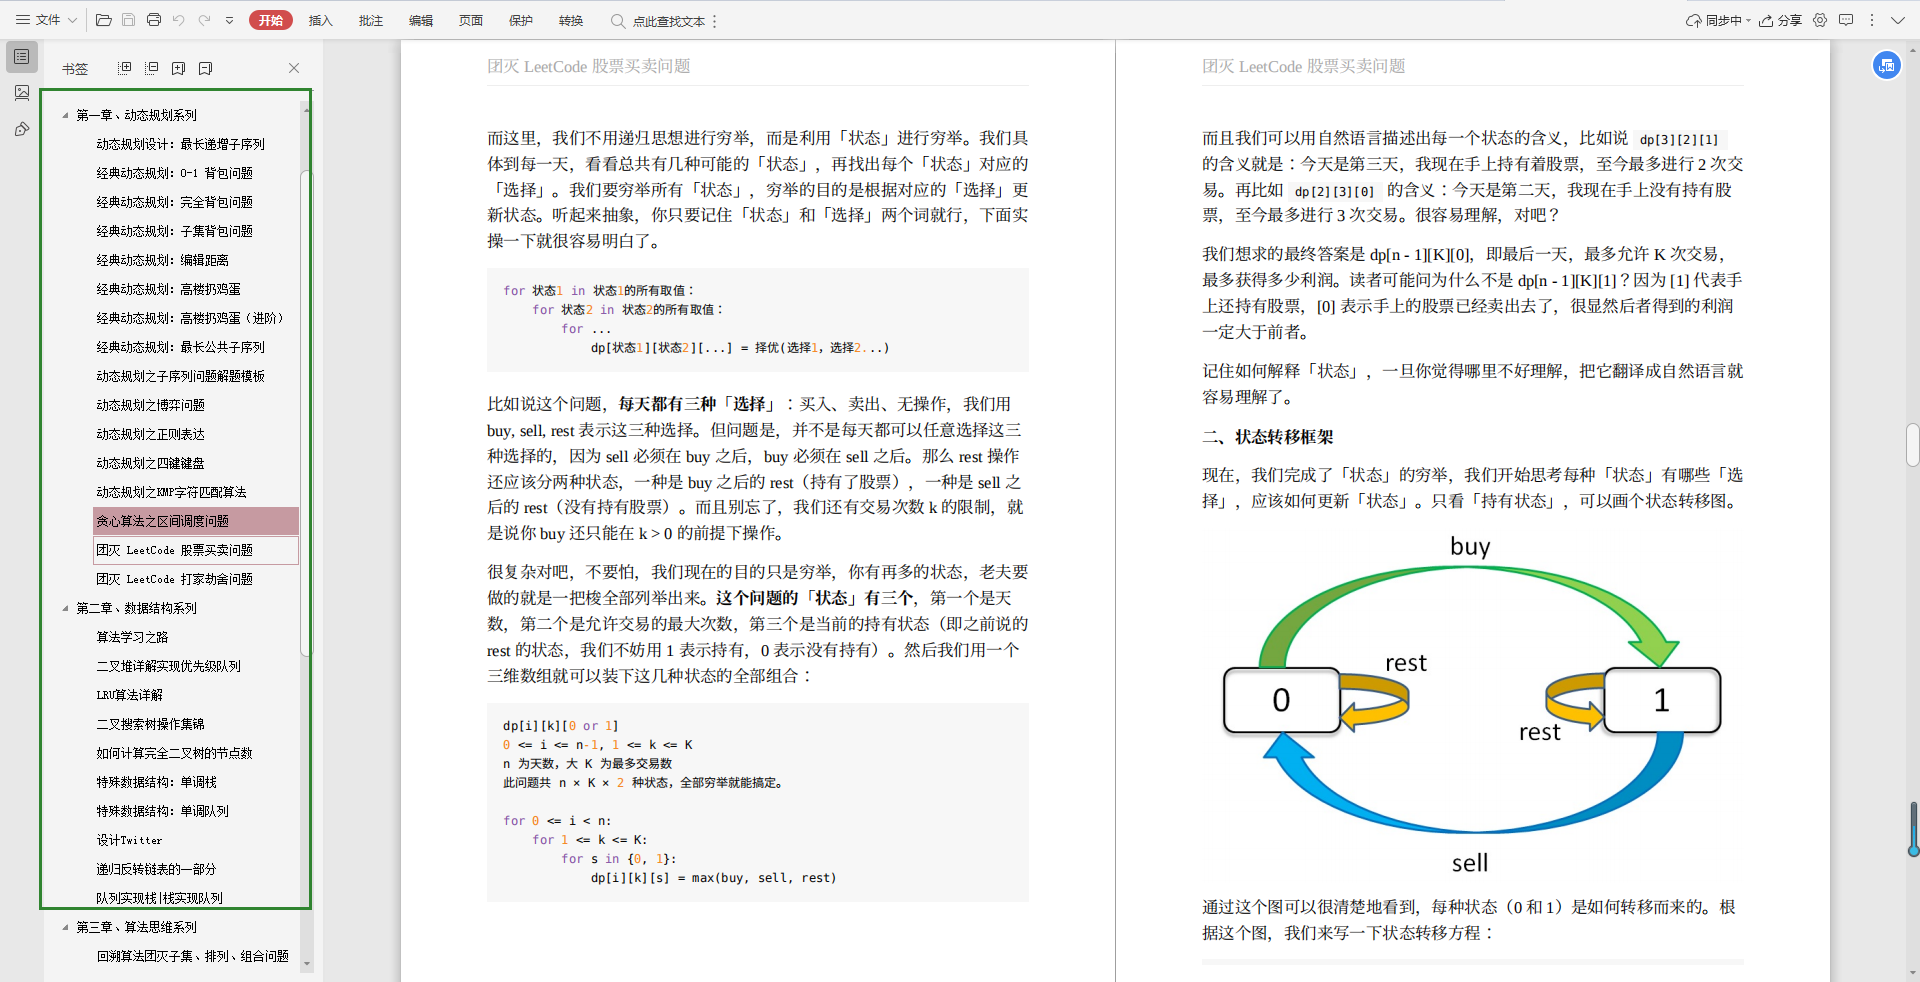 Love it!  Alibaba blew himself up "Notes on Java Core Architecture", too awesome